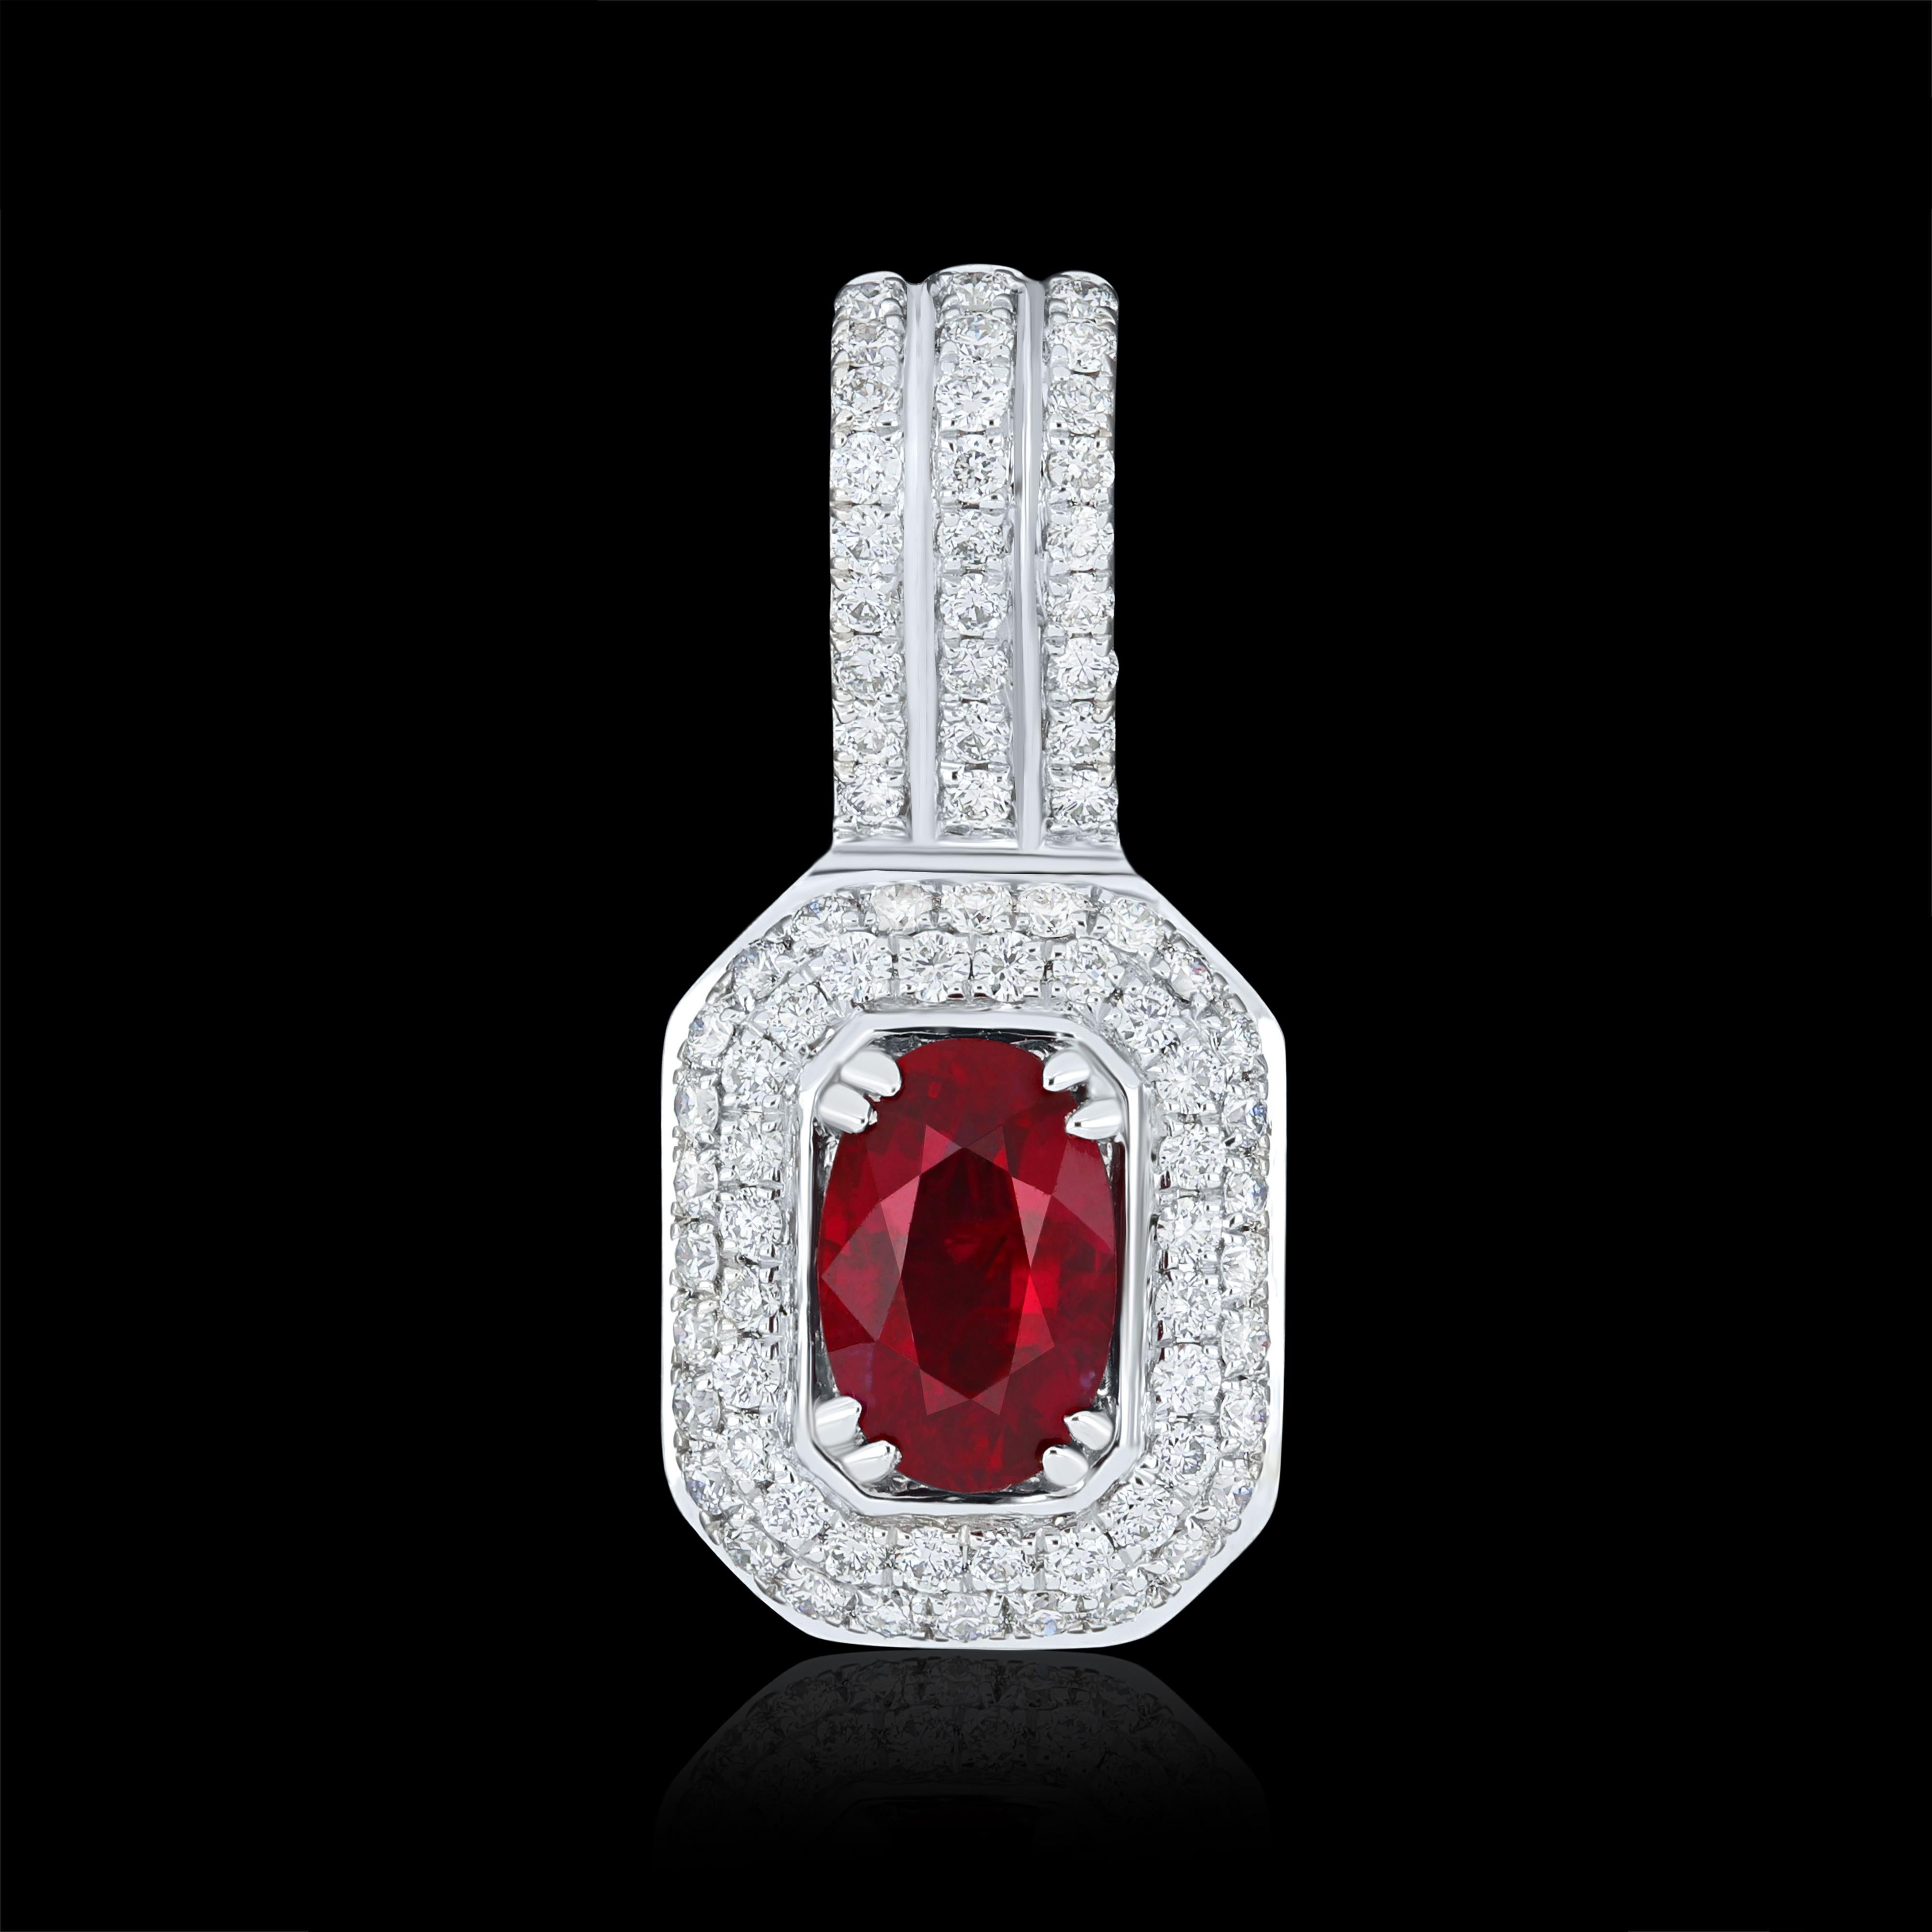 Elegant and exquisitely detailed 18 Karat White Gold Pendant, center set with 0.55 Cts .Oval Shape Ruby Mozambique and micro pave set Diamonds, weighing approx. 0.29 Cts Beautifully Hand crafted in 18 Karat White Gold.

Stone Detail:
Ruby